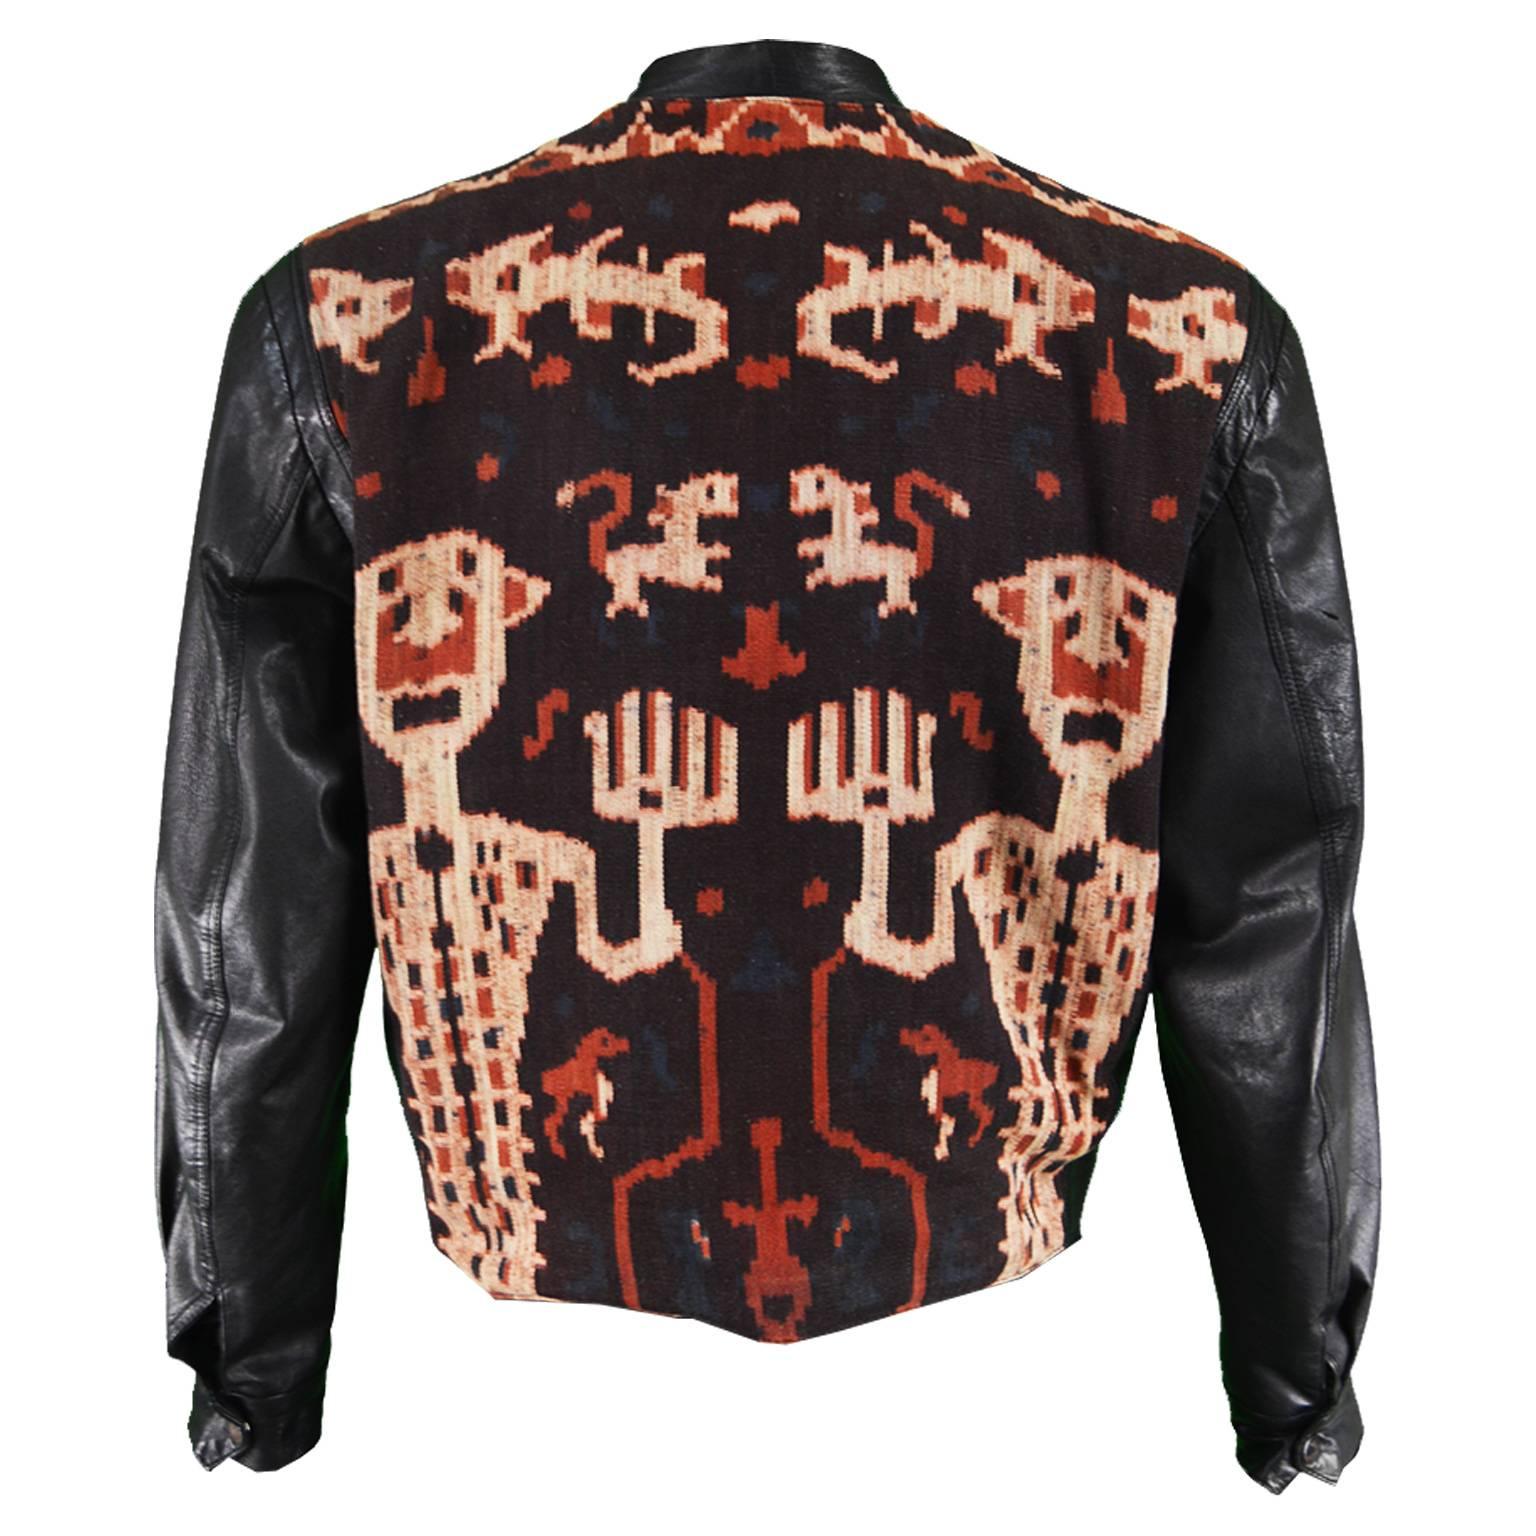 Abrasive Aorta Men's Vintage Leather and Handwoven Ikat Tapestry Jacket, 1980s